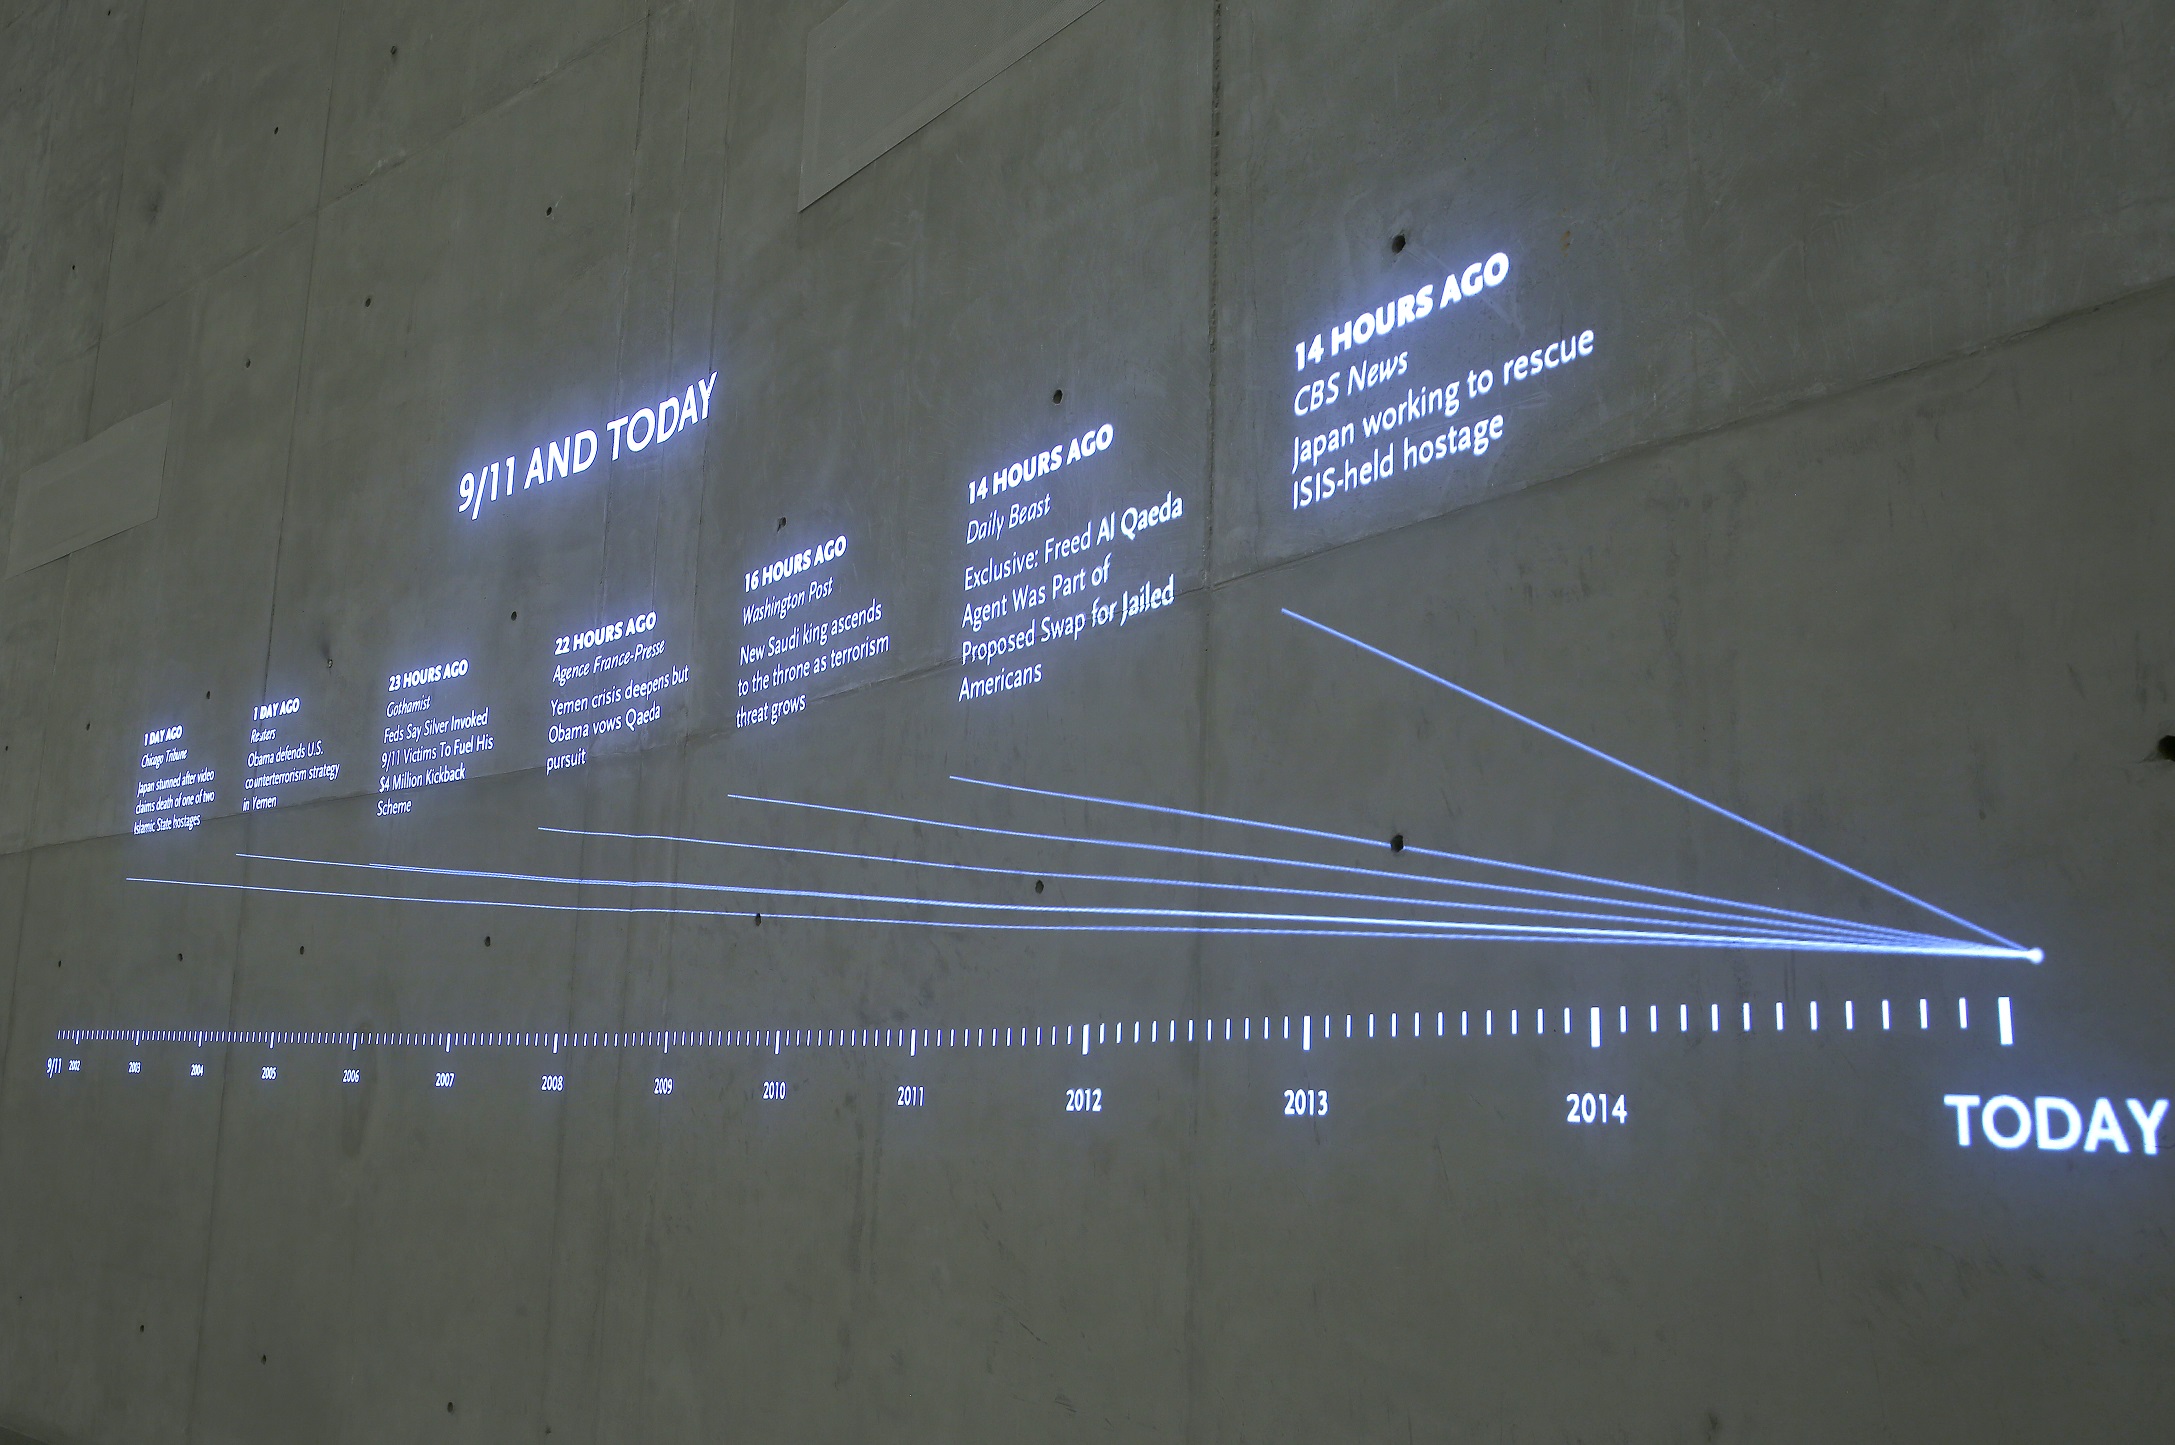 The Timescape is seen projected on a wall in Foundation Hall at the 9/11 Memorial. The installation displays current news related to 9/11 and terrorism.